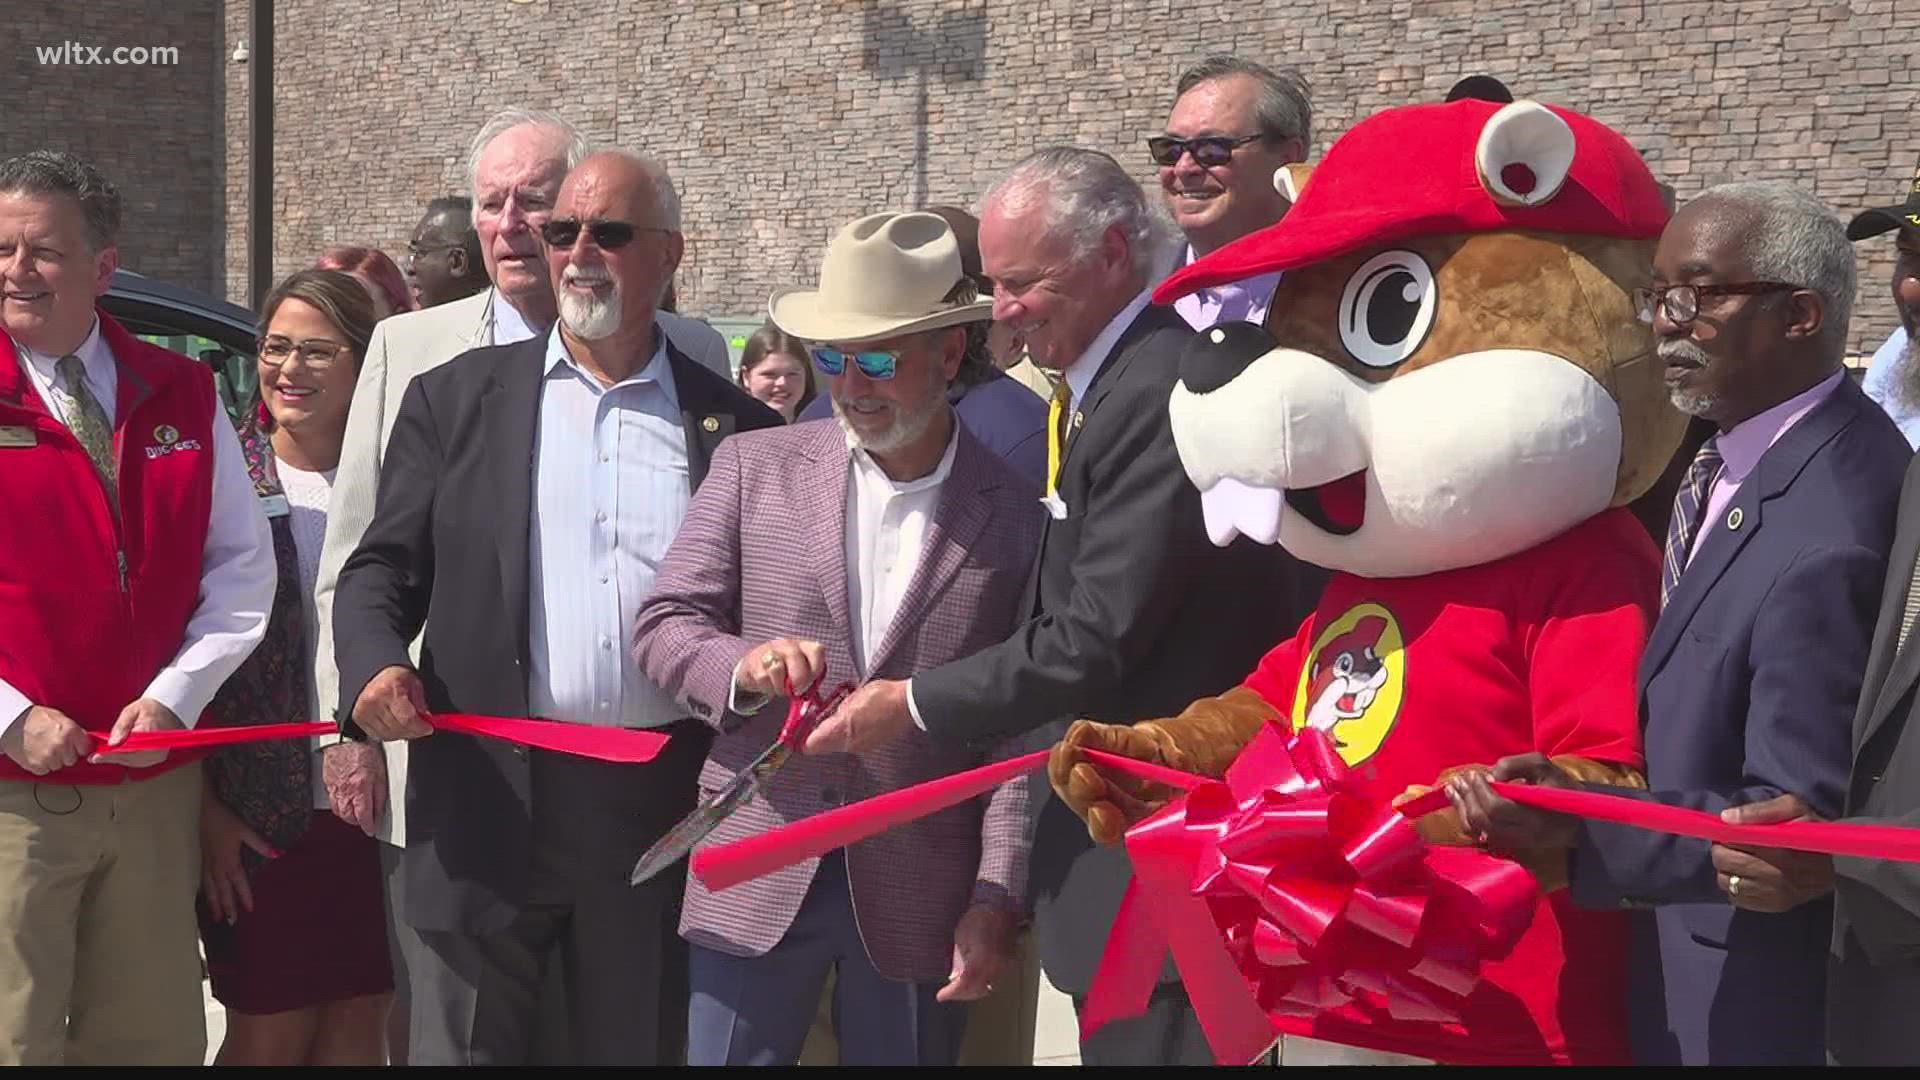 Buc-ees is now open in Florence, South Carolina. Josh Lewis takes us there.